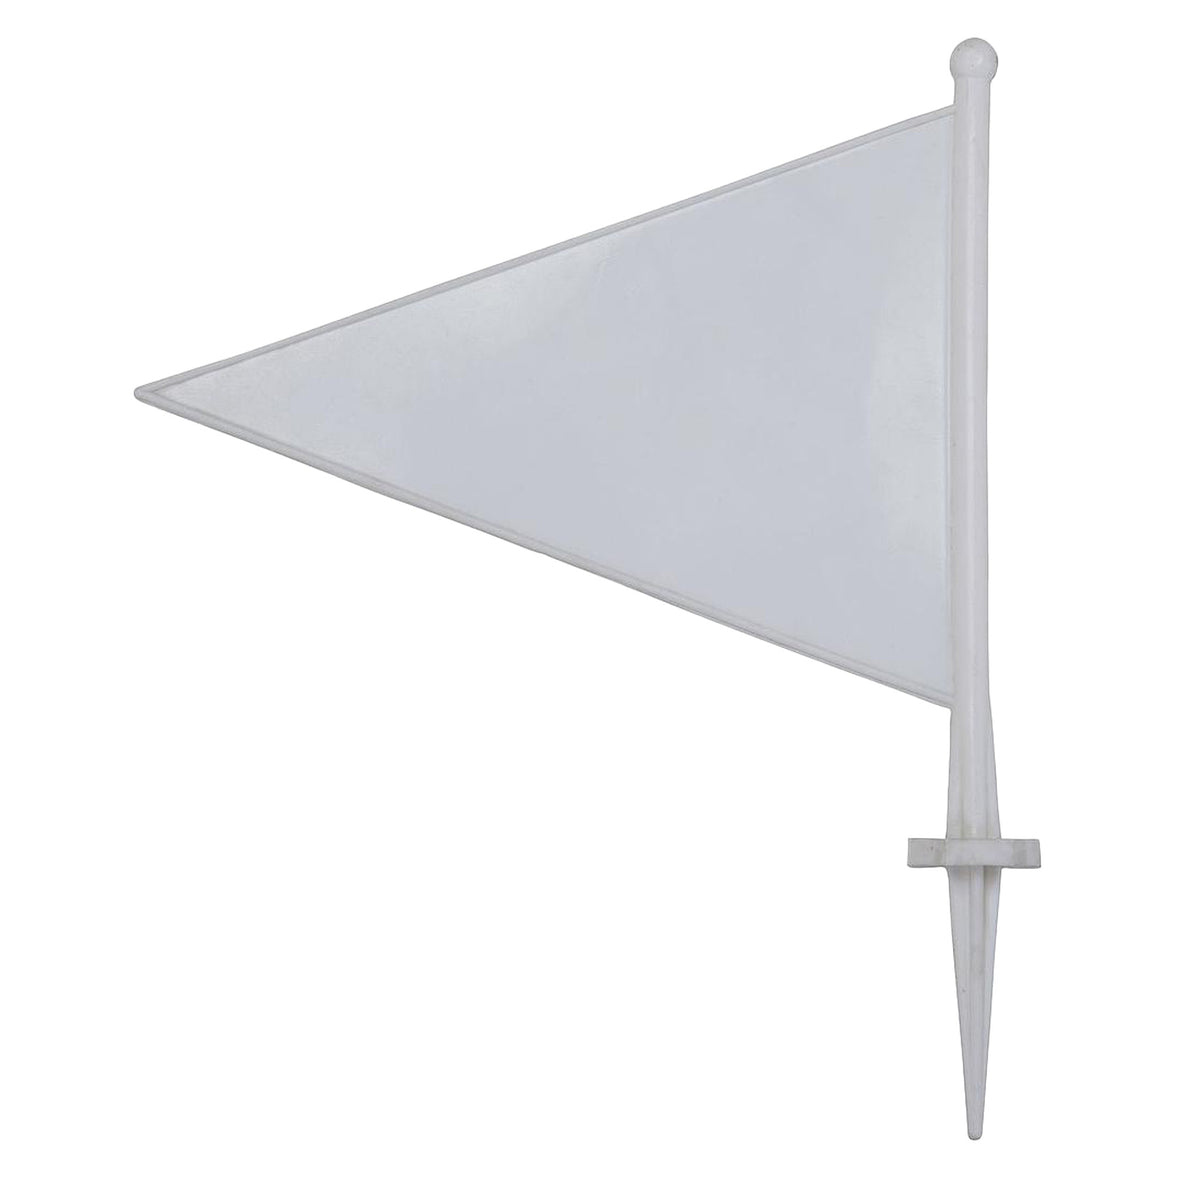 Cricket Boundary Flags: Pack of 25 White